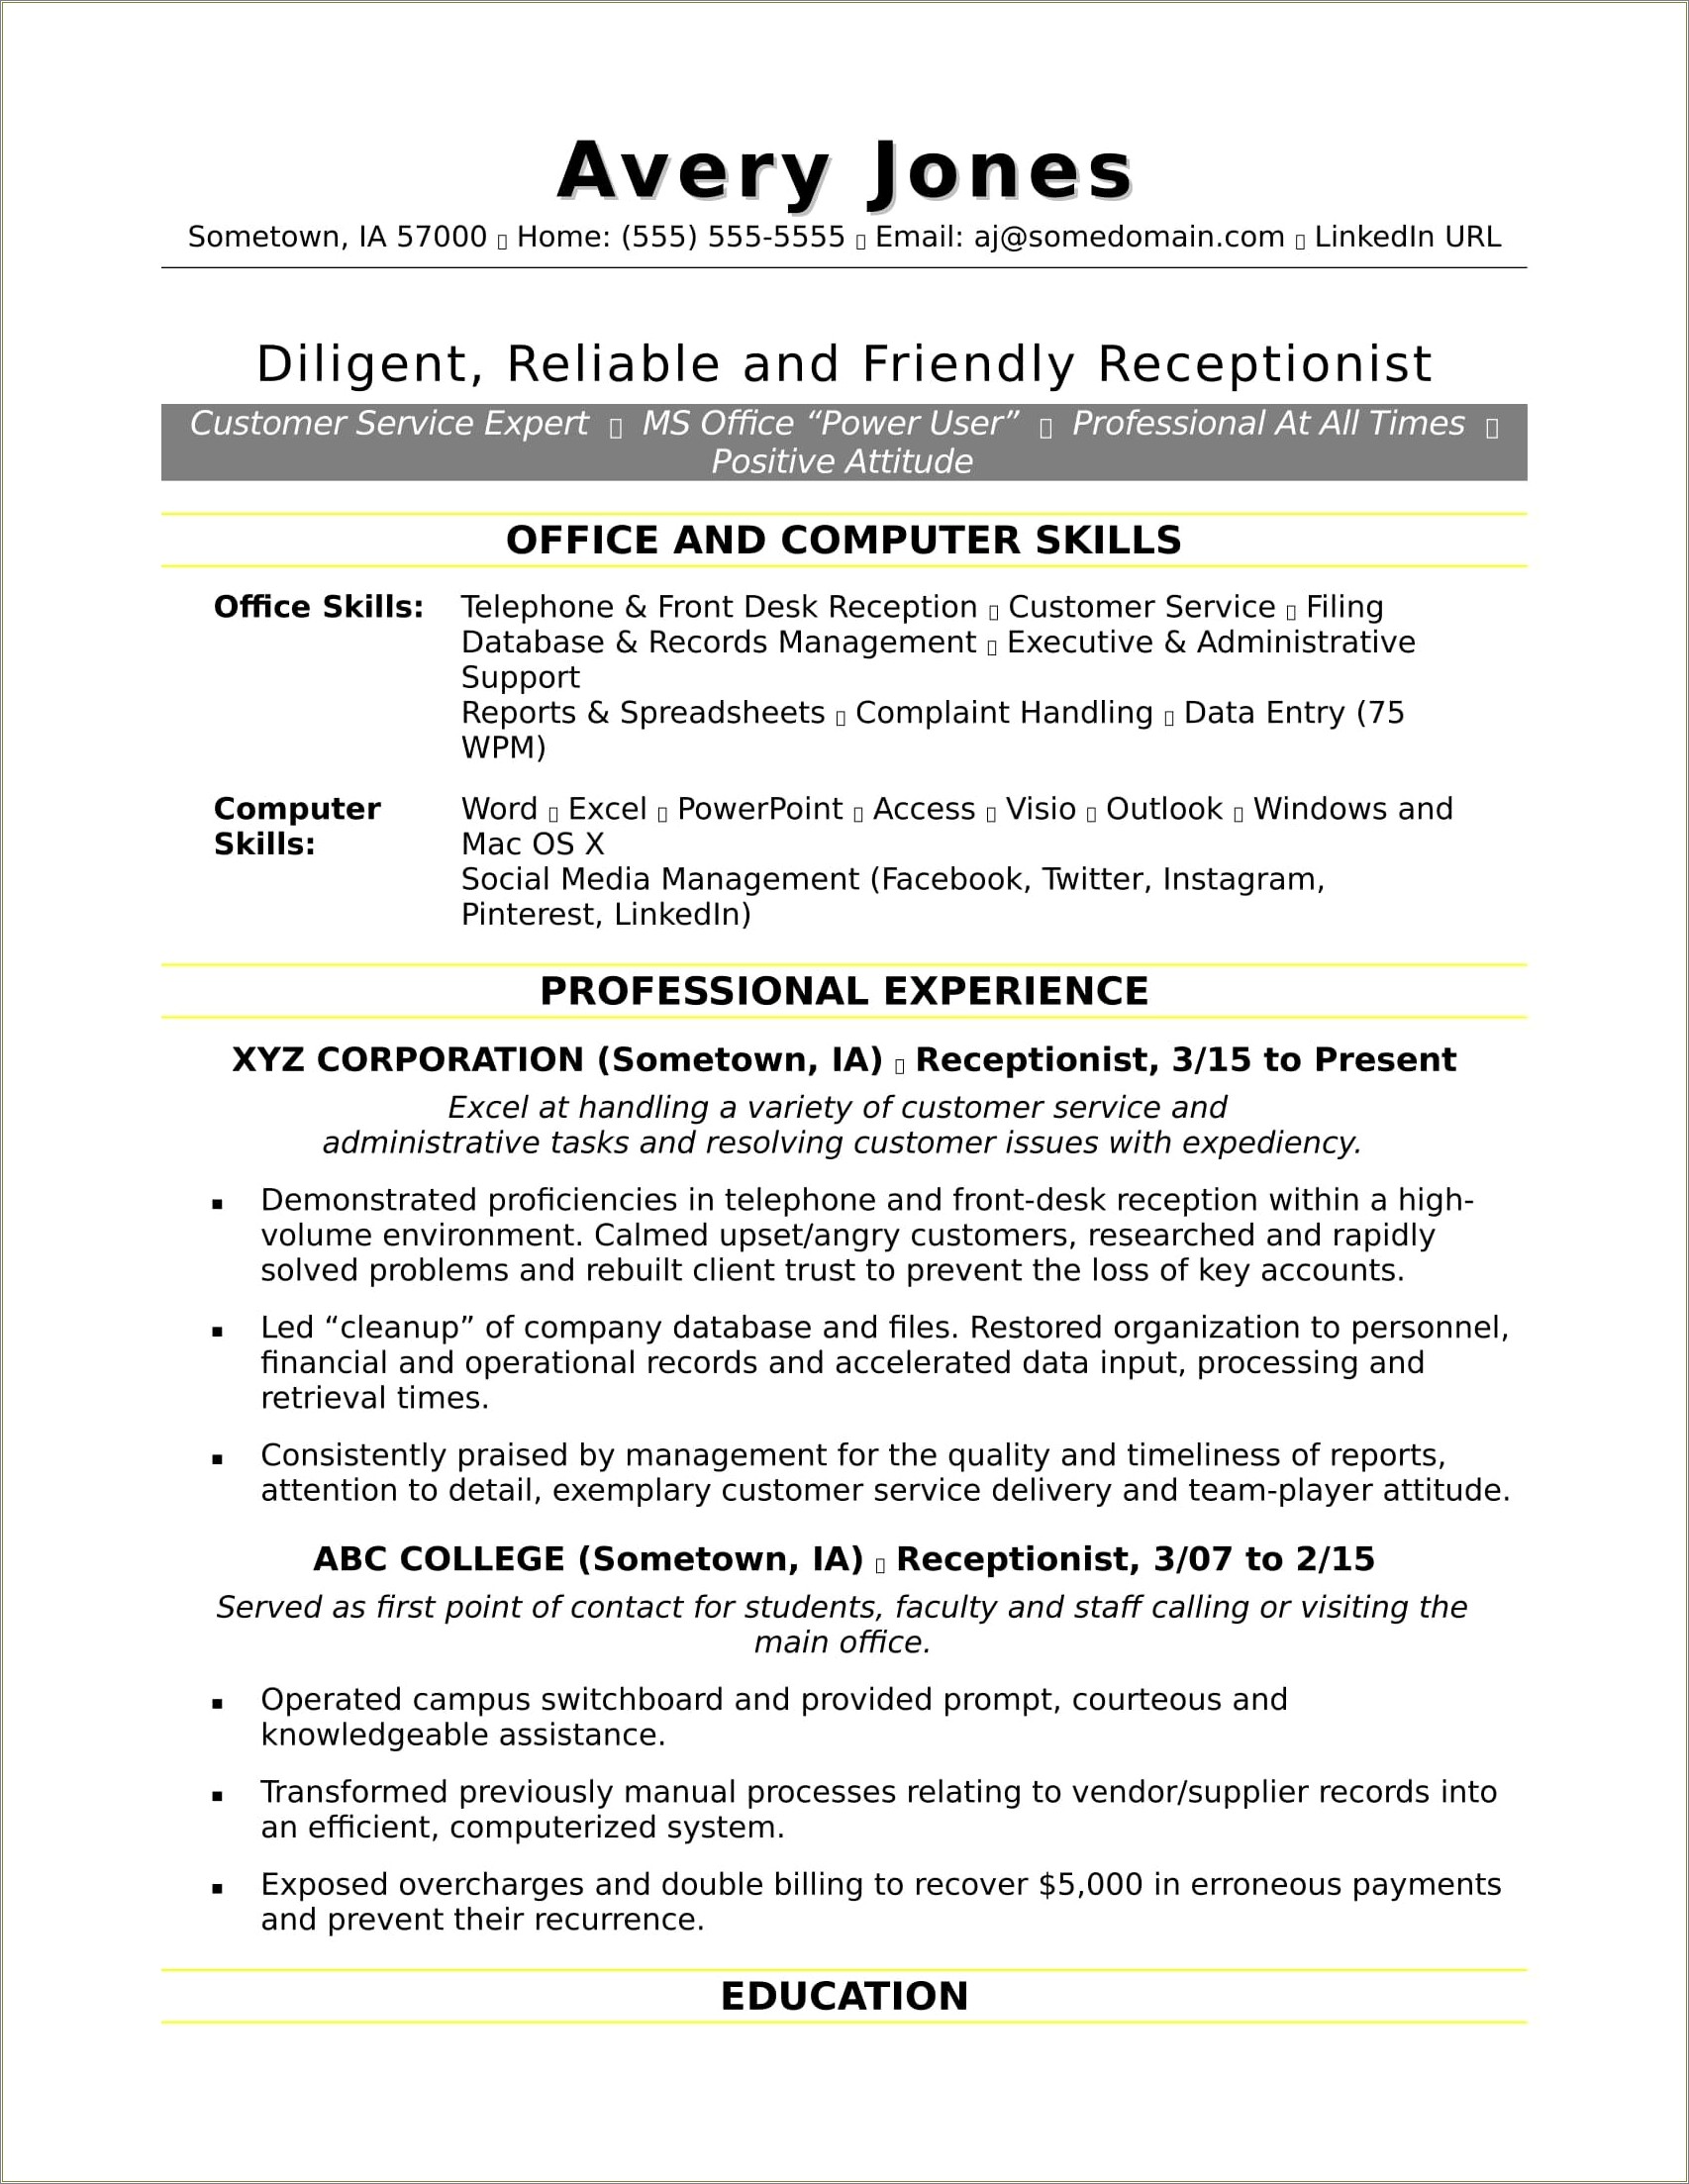 Job Experience Or Skills First Resume